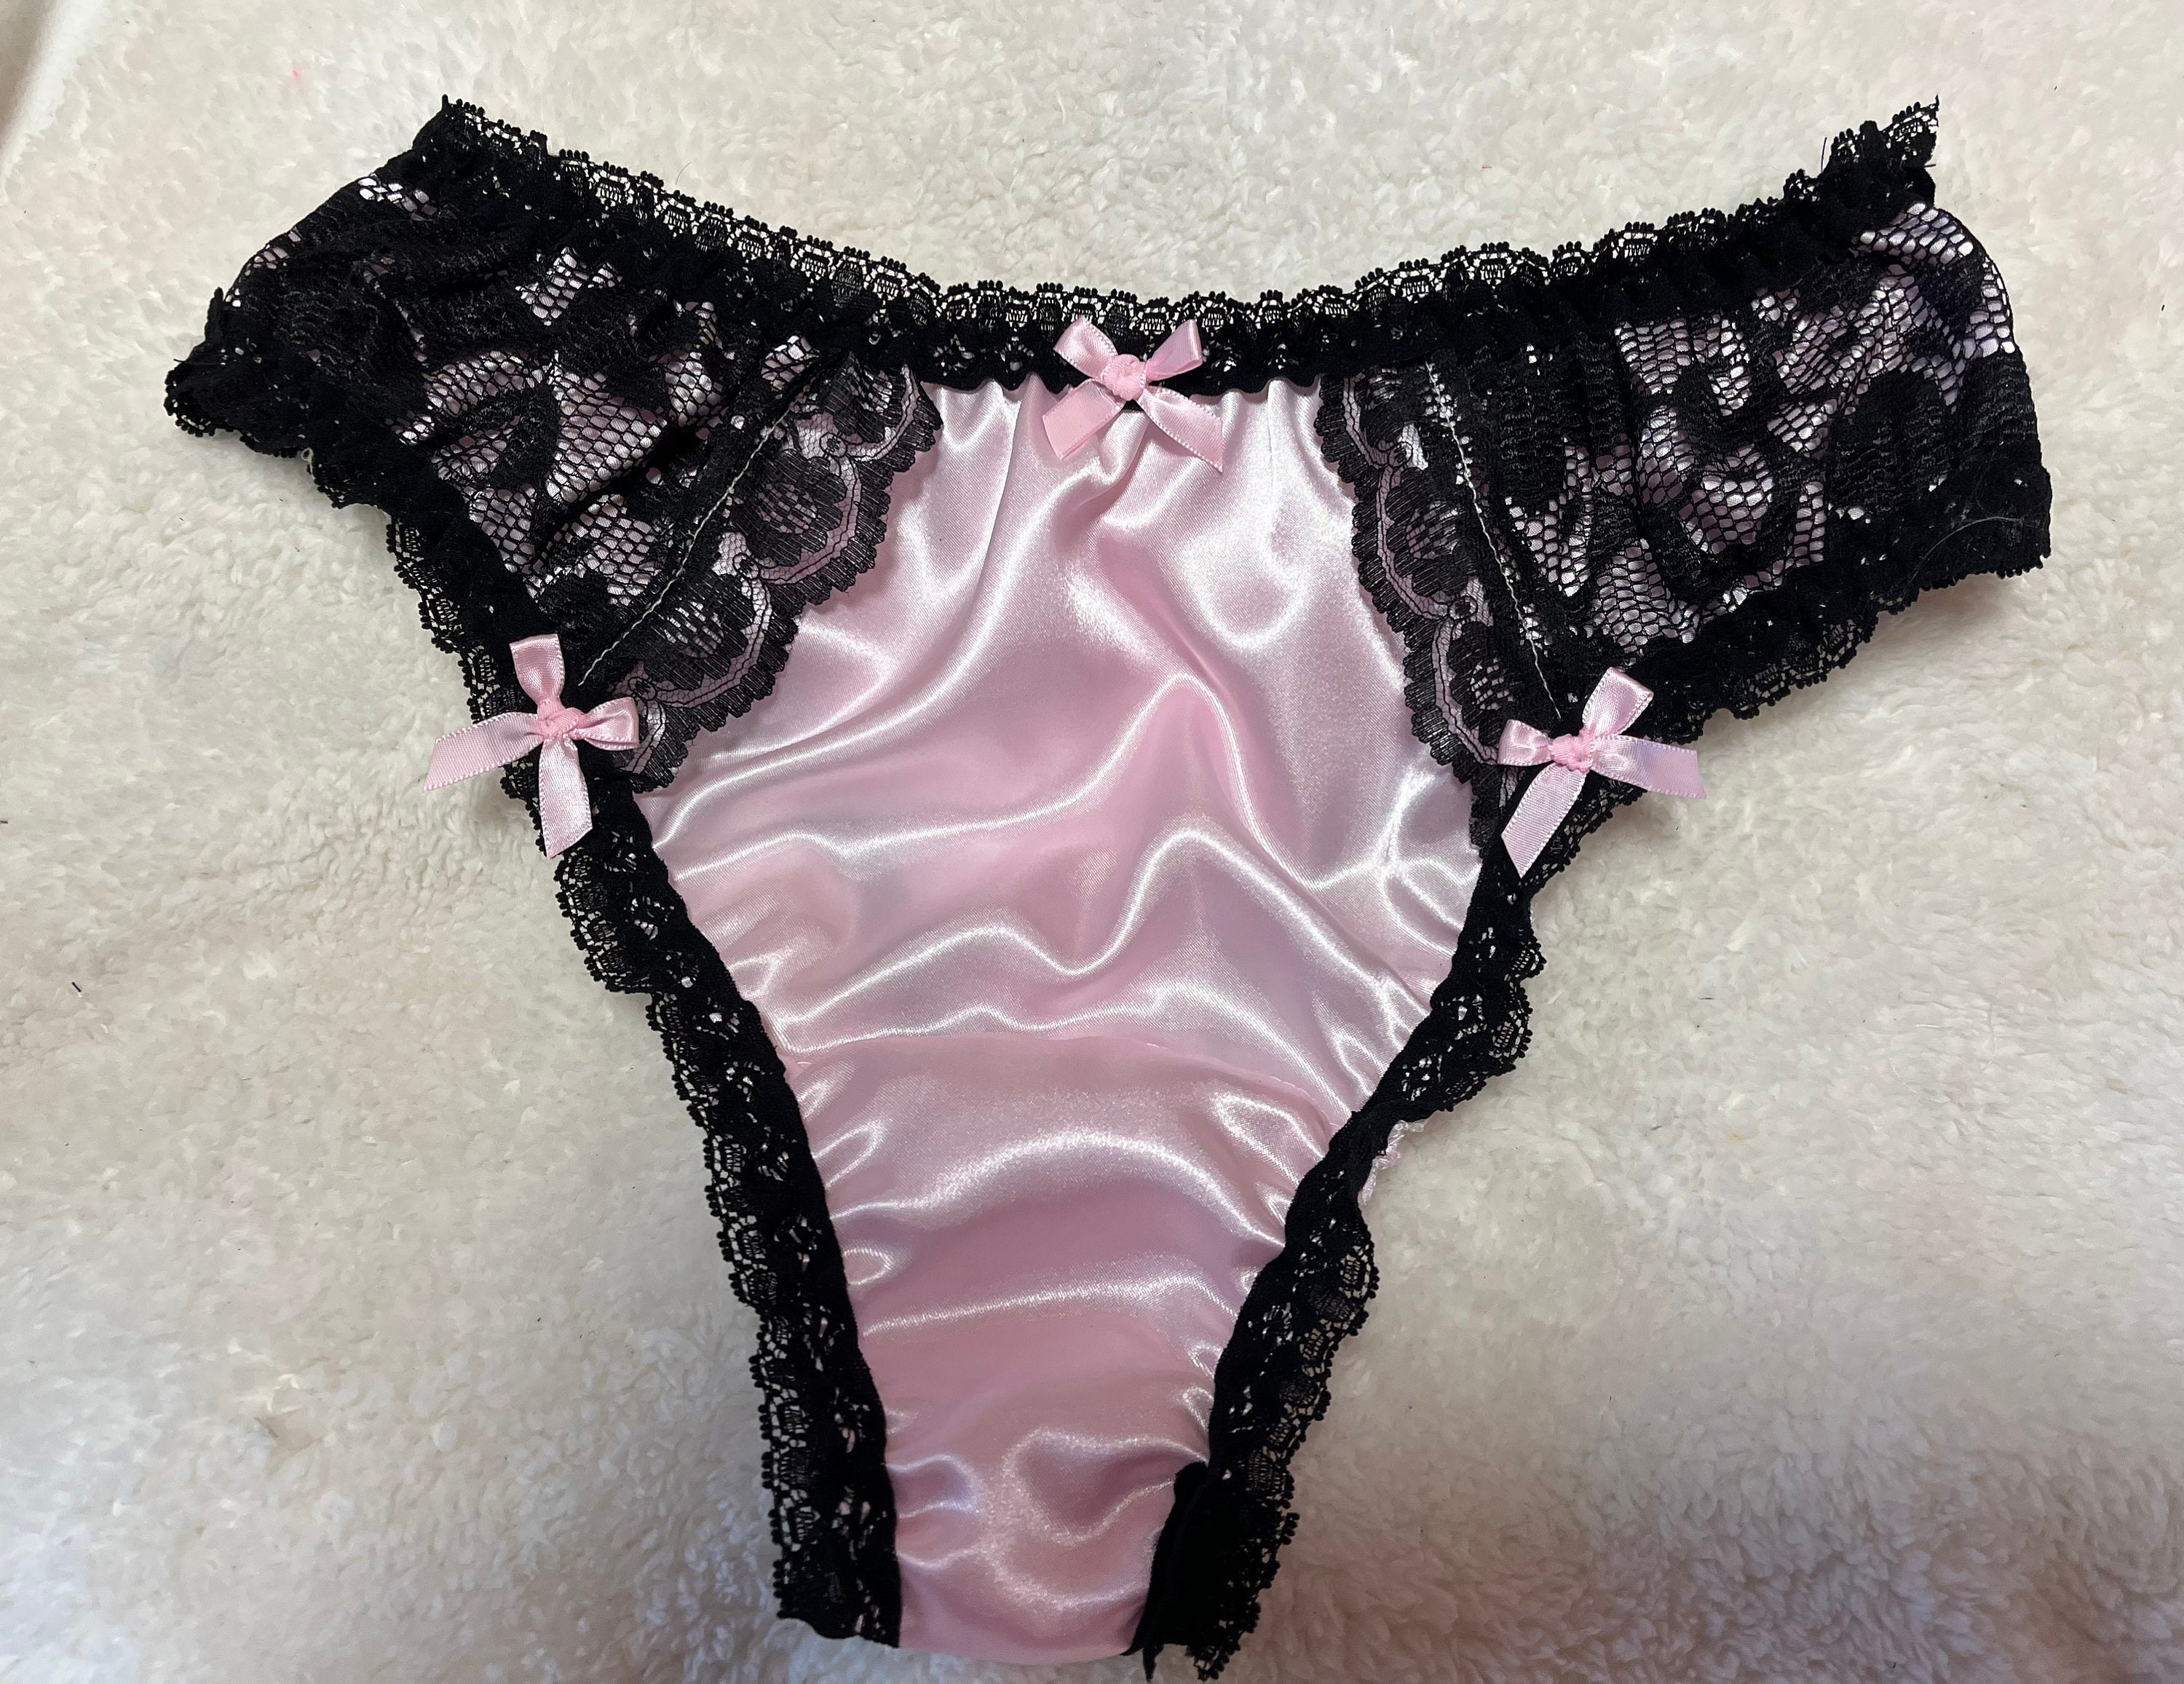 bethany devries recommends pink and black lace panties pic